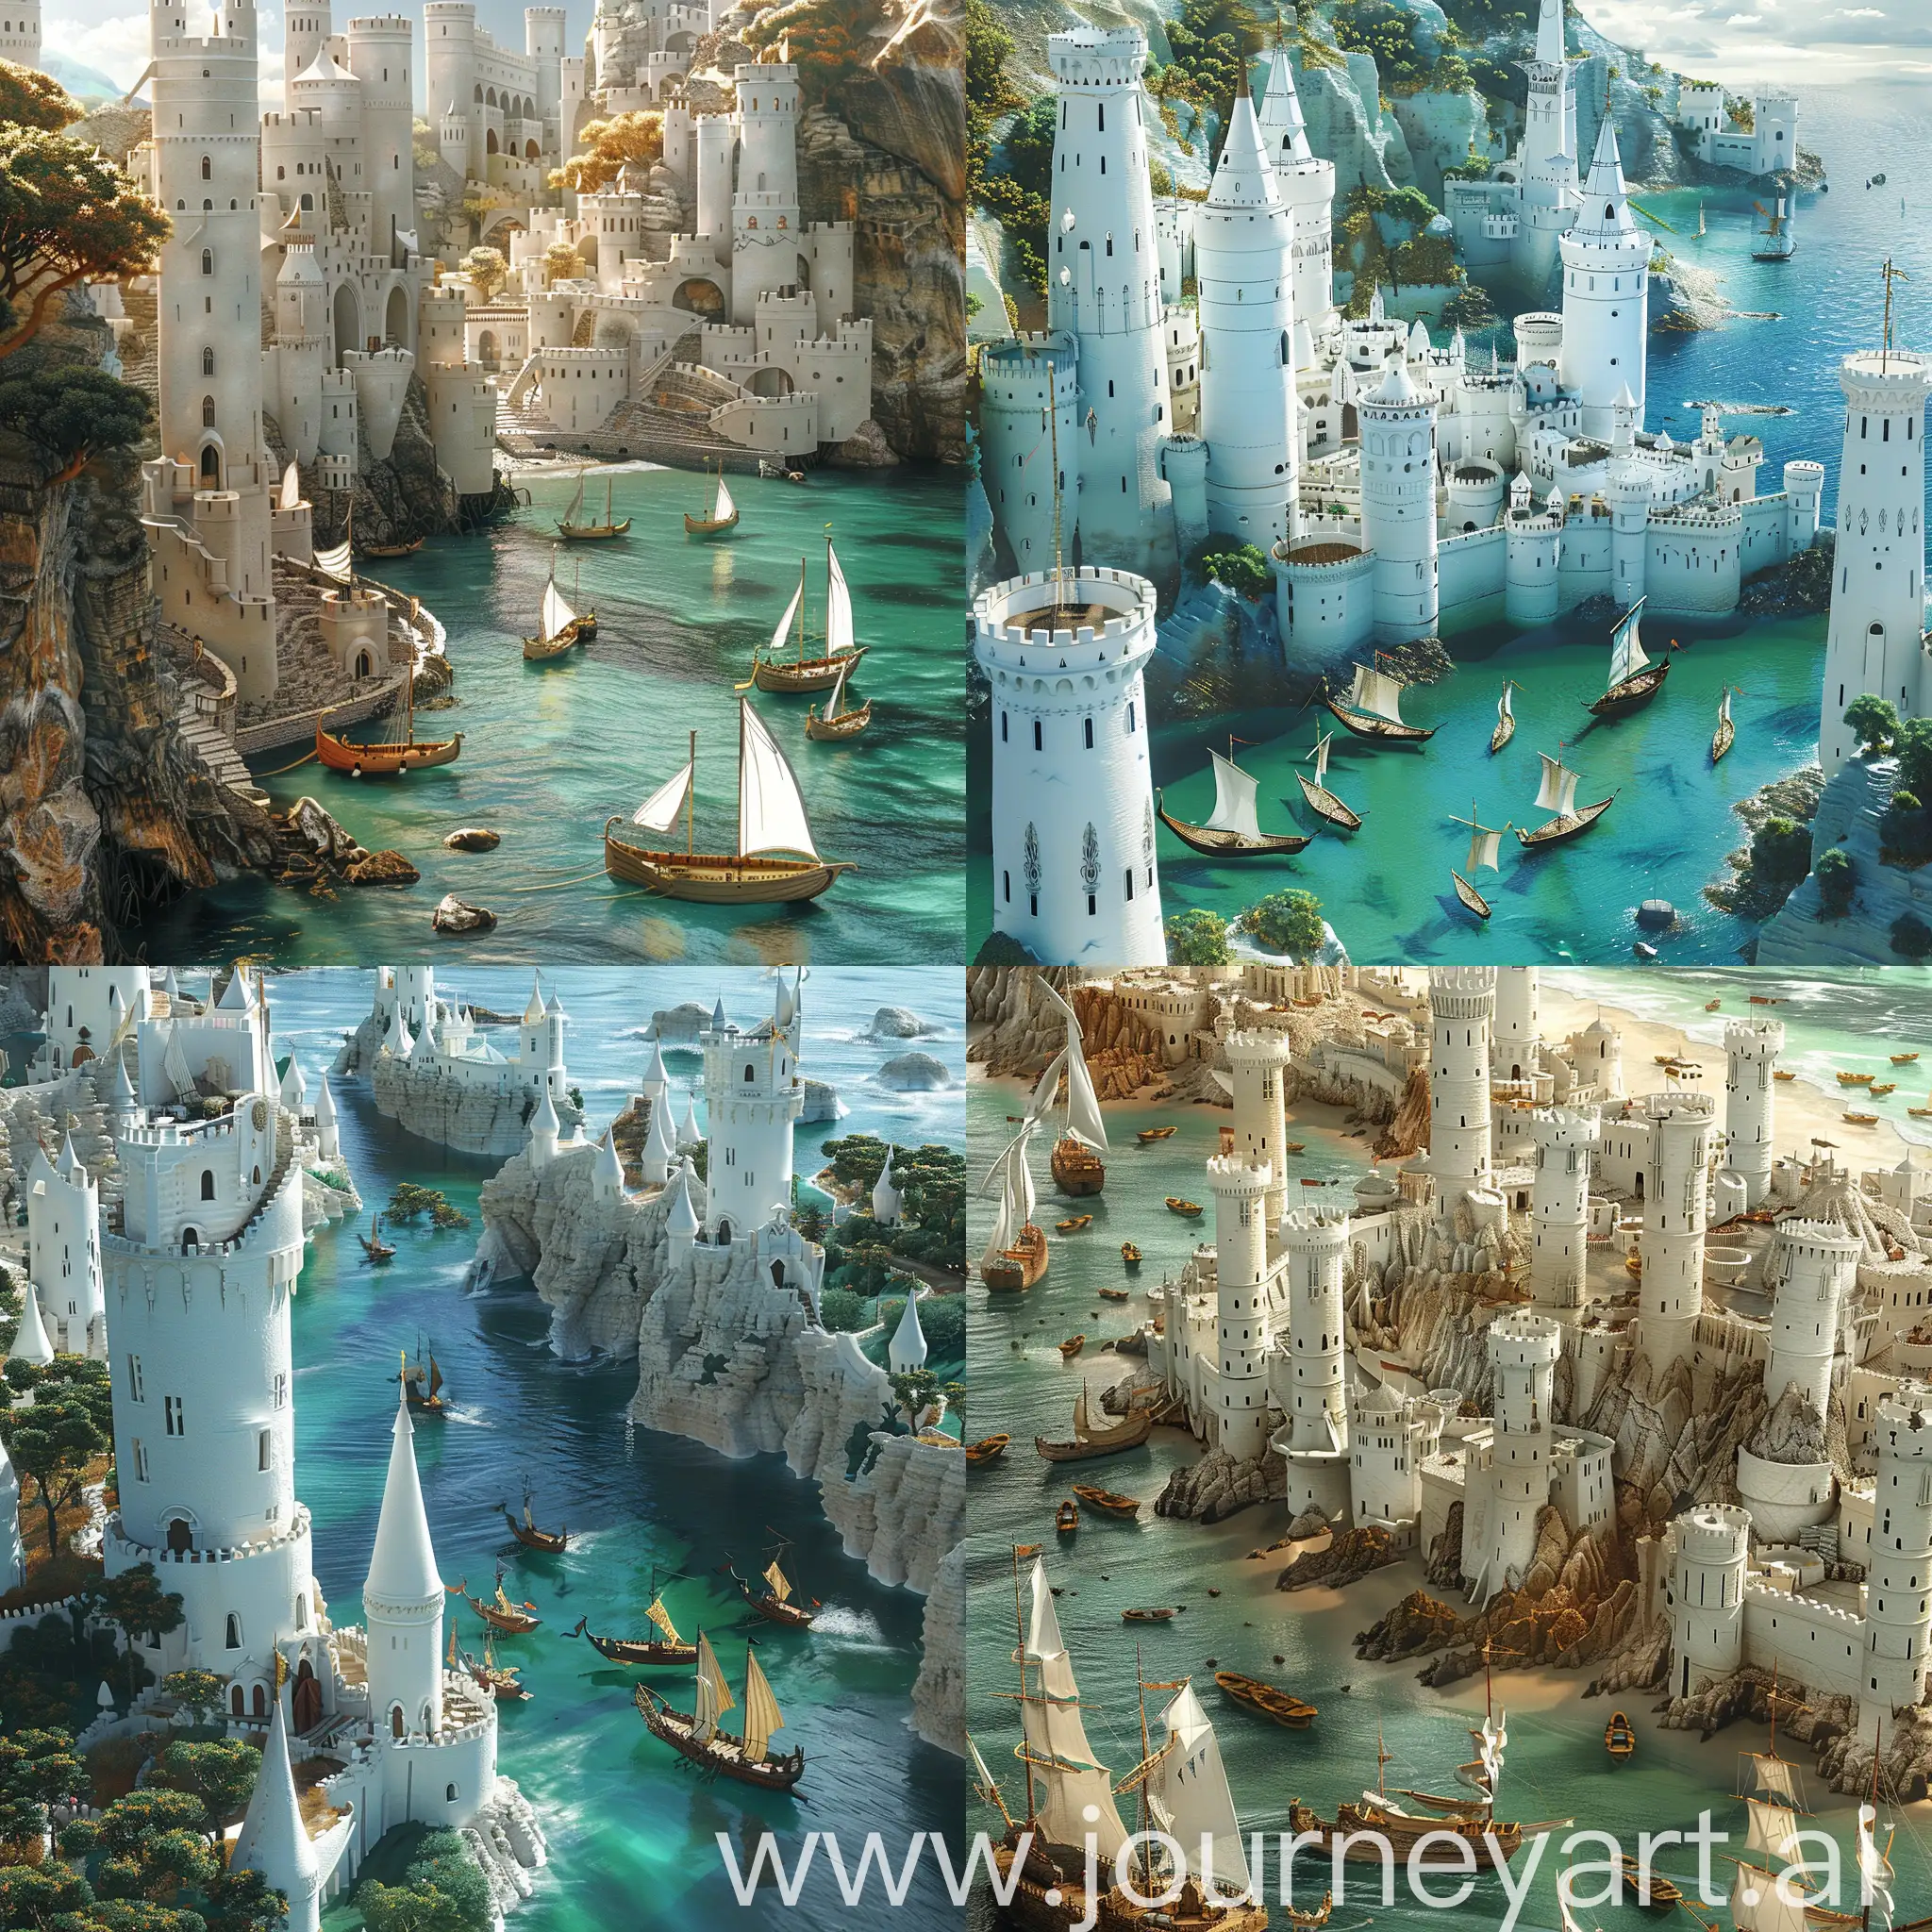 Enchanting-Elven-City-by-the-Coast-with-Towering-White-Structures-and-Gliding-Elven-Boats